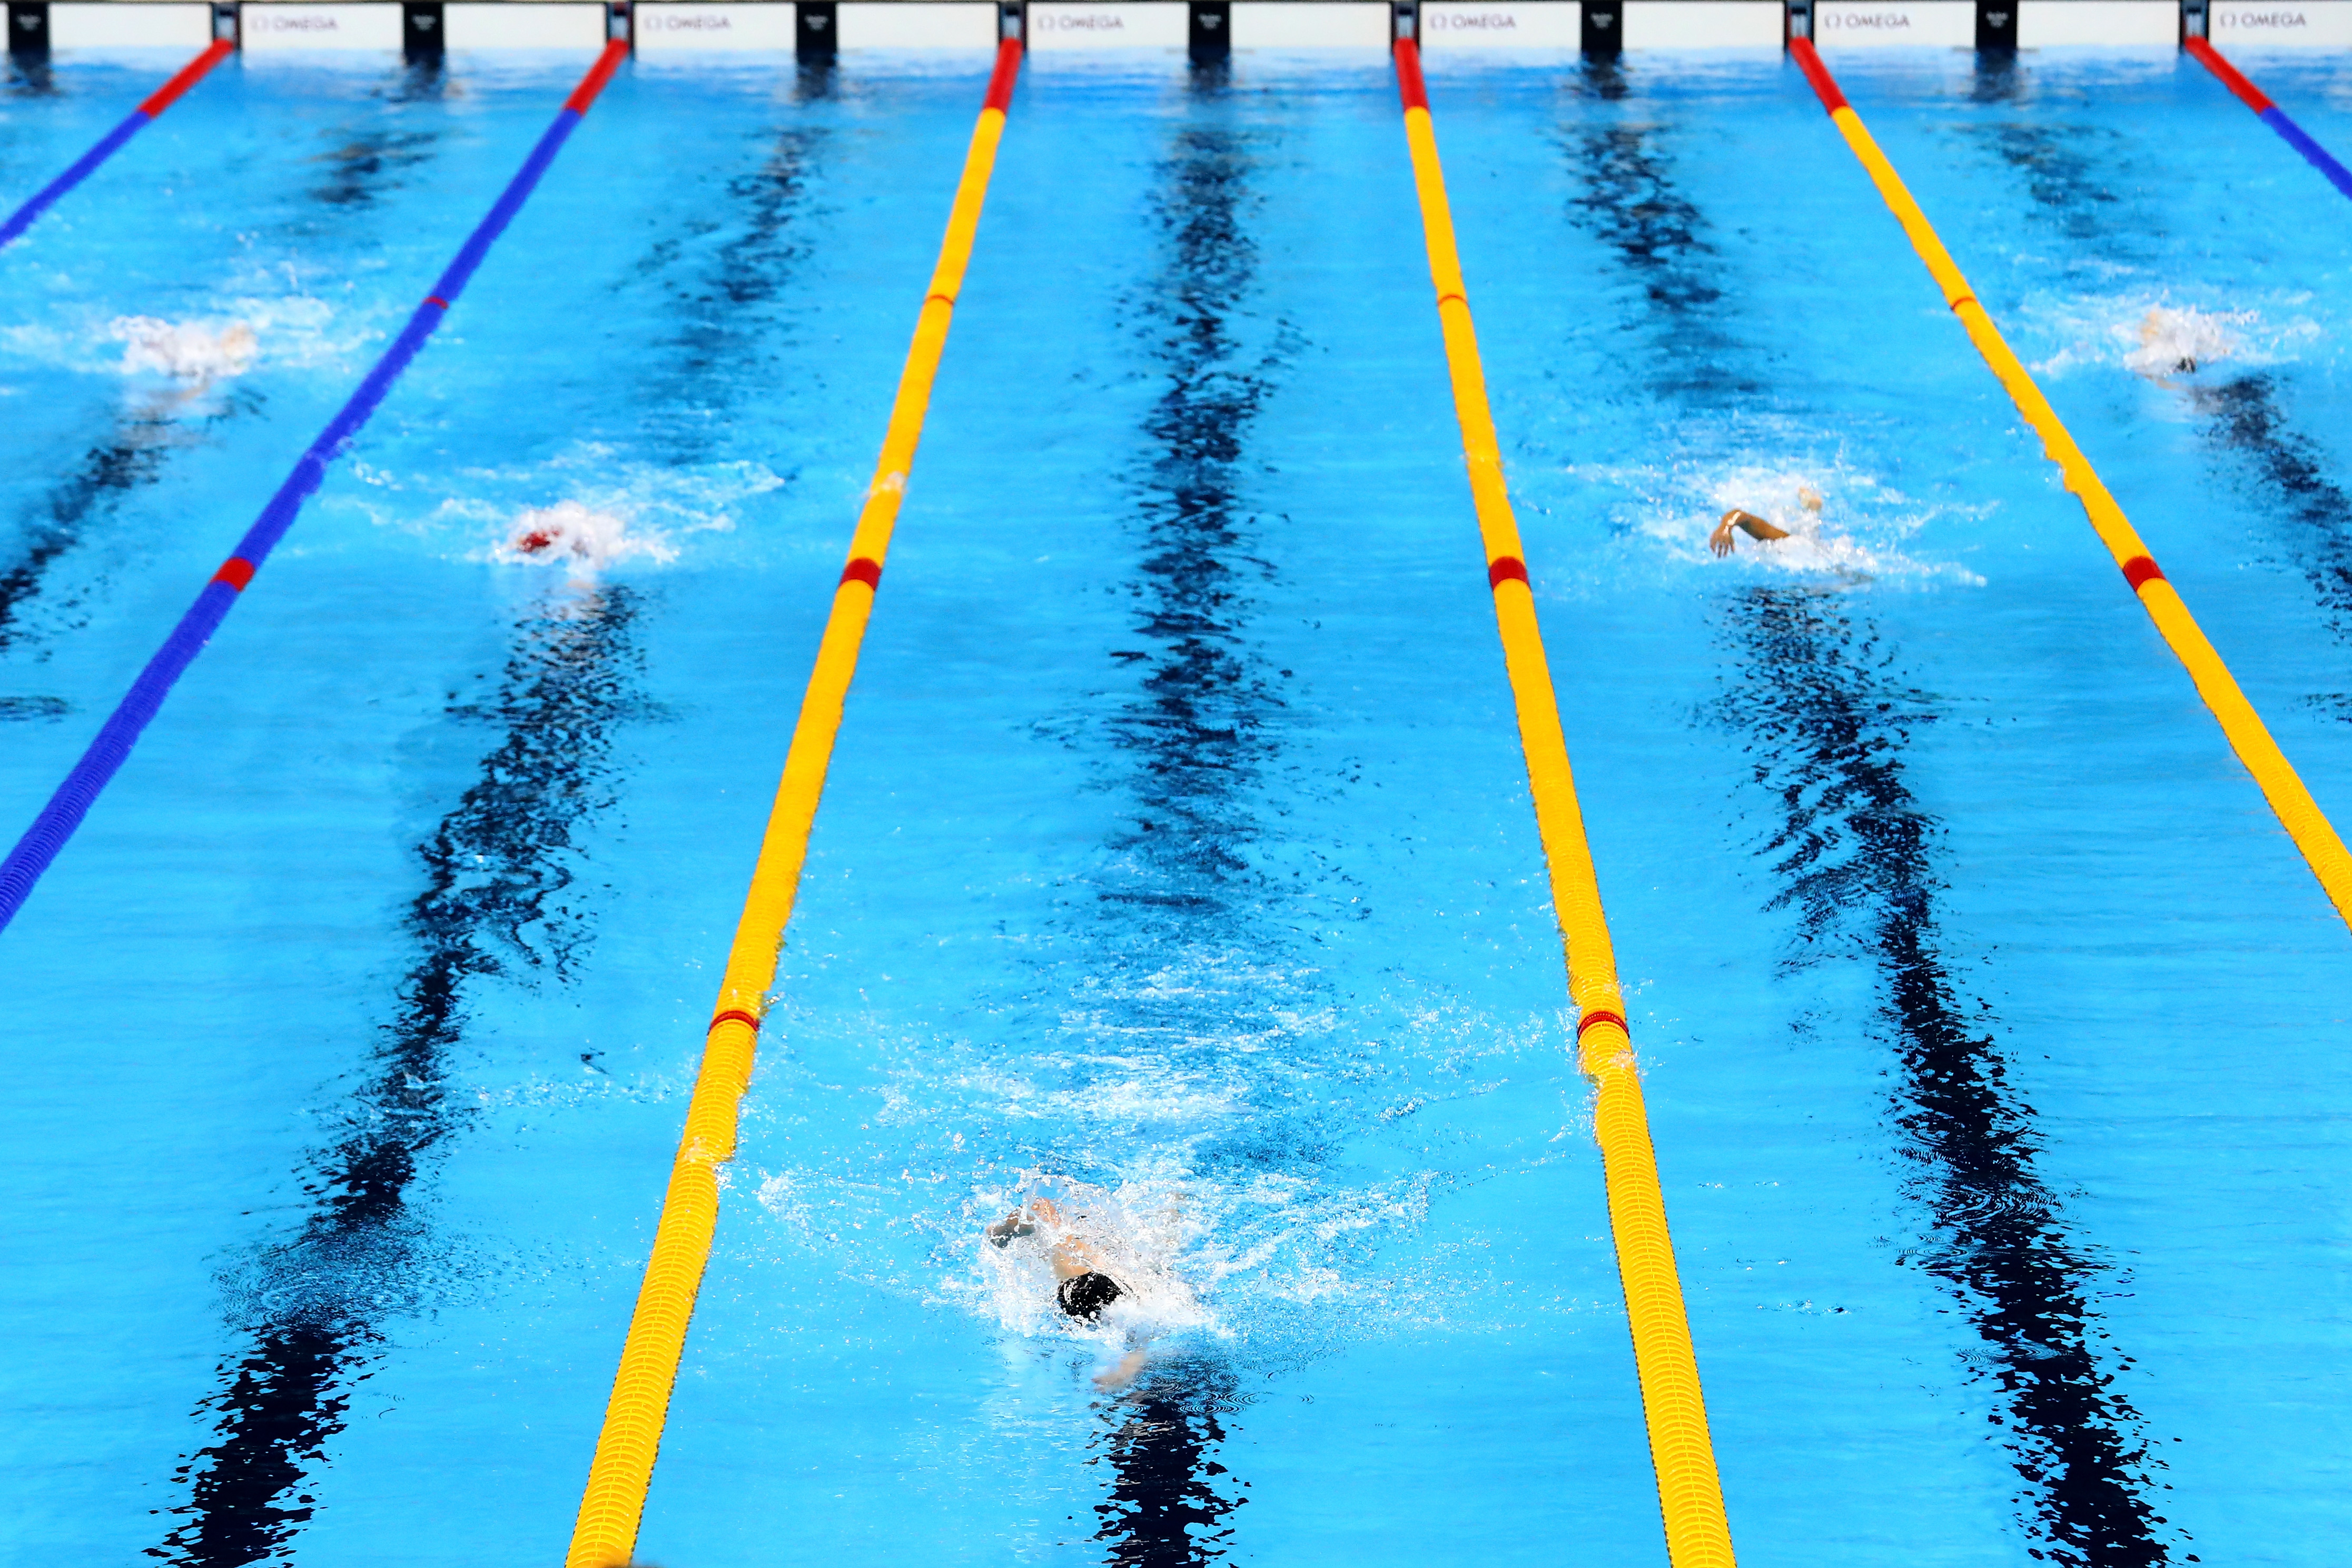 Katie Ledecky leads the field in the Women's 800m Freestyle Final on Day 7 of the Rio 2016 Olympic Games, on August 12, 2016. (Dean Mouhtaropoulos—Getty Images)